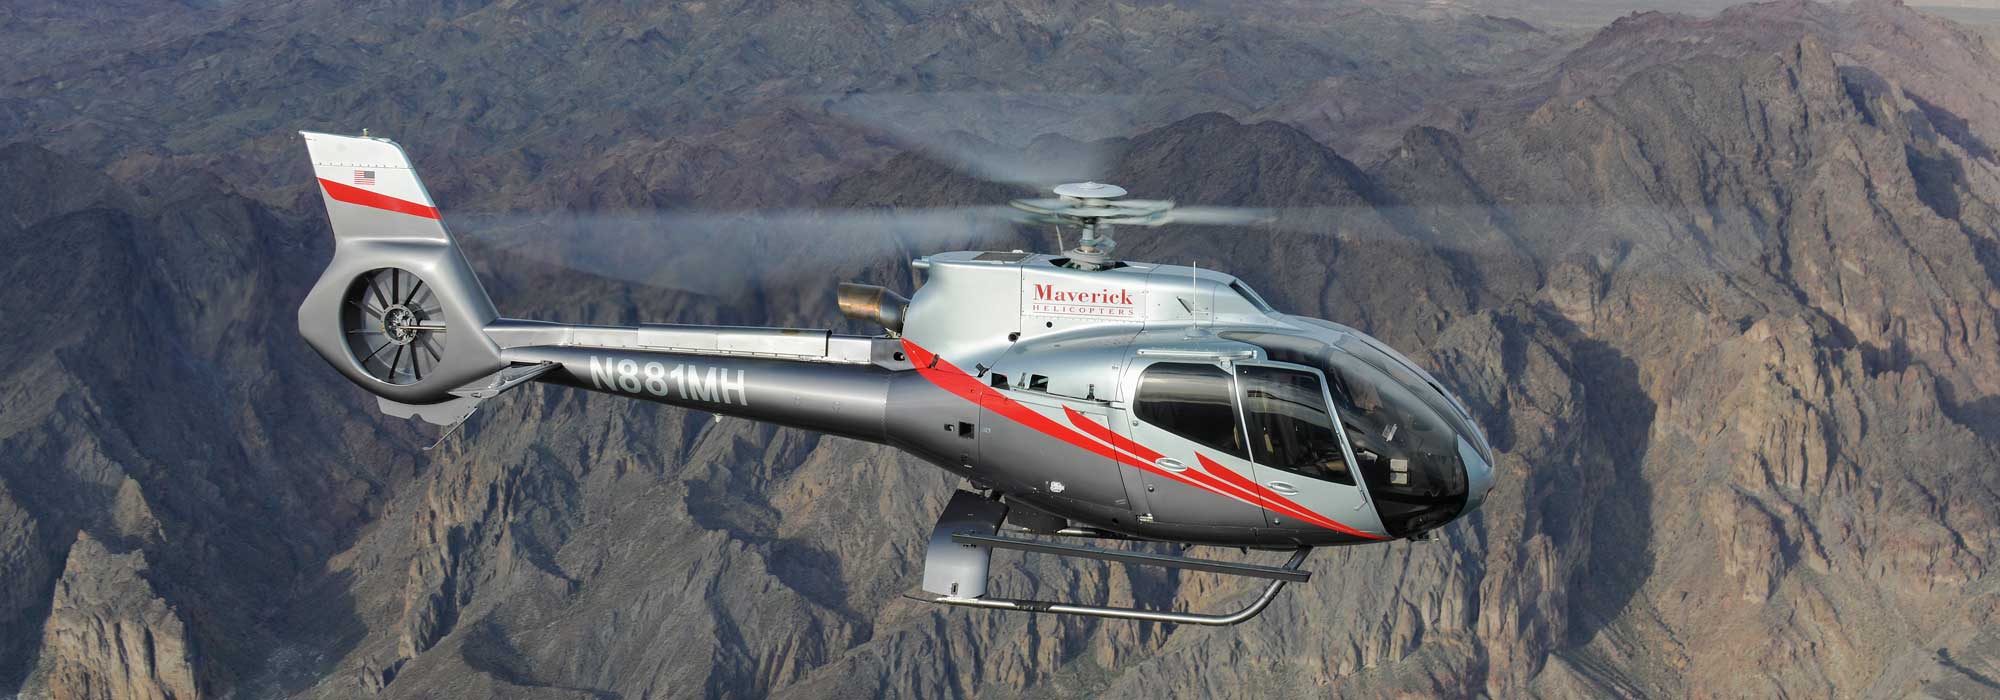 Charter Helicopter Request Form